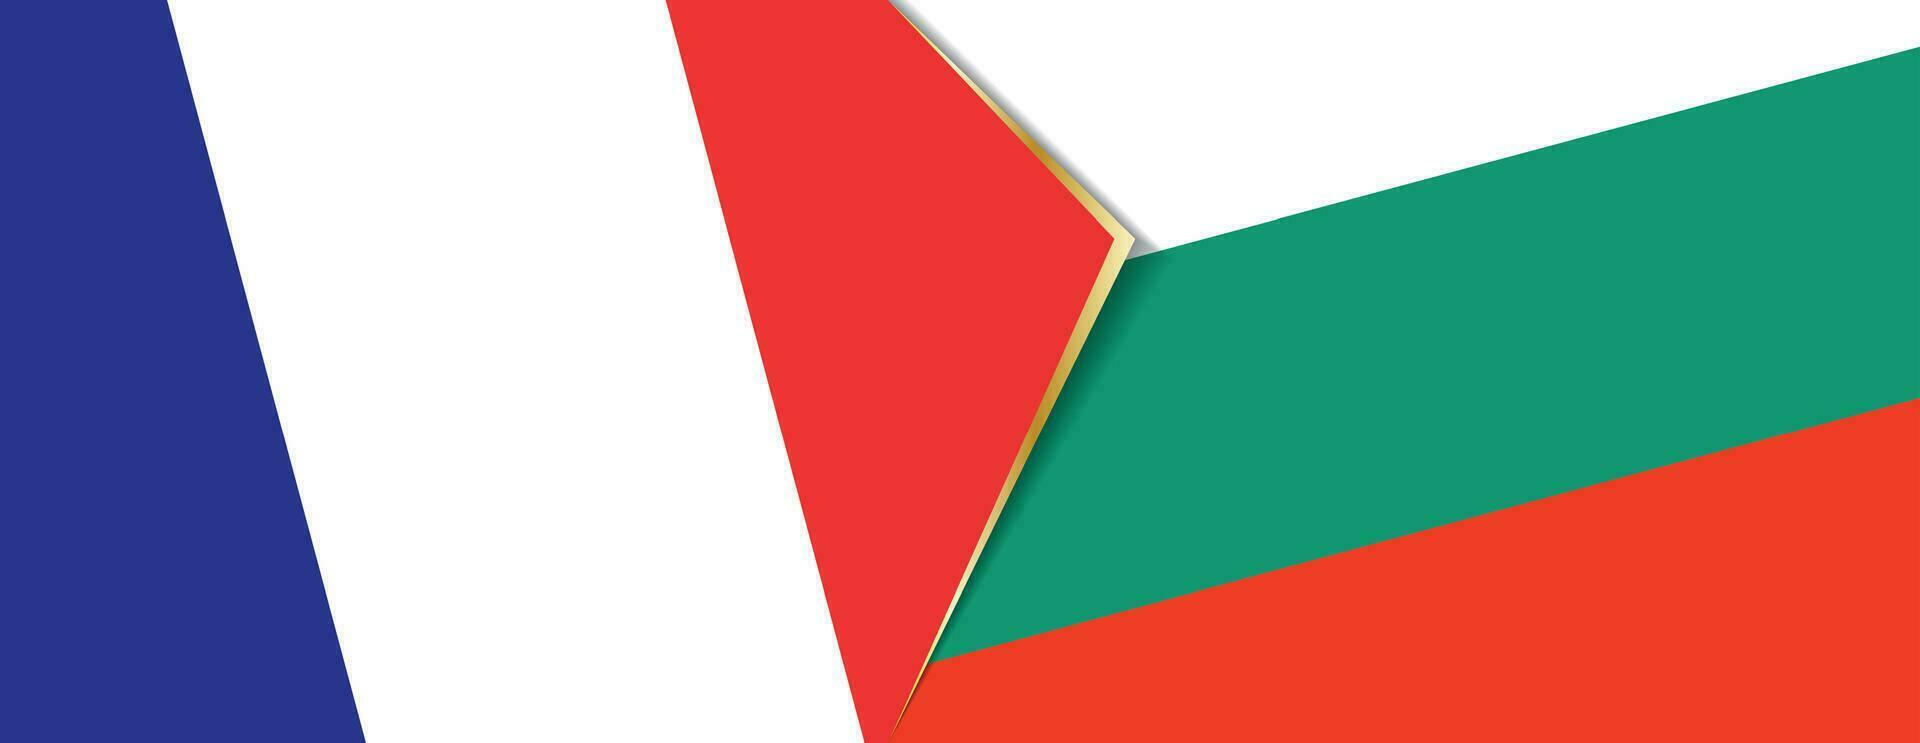 France and Bulgaria flags, two vector flags.